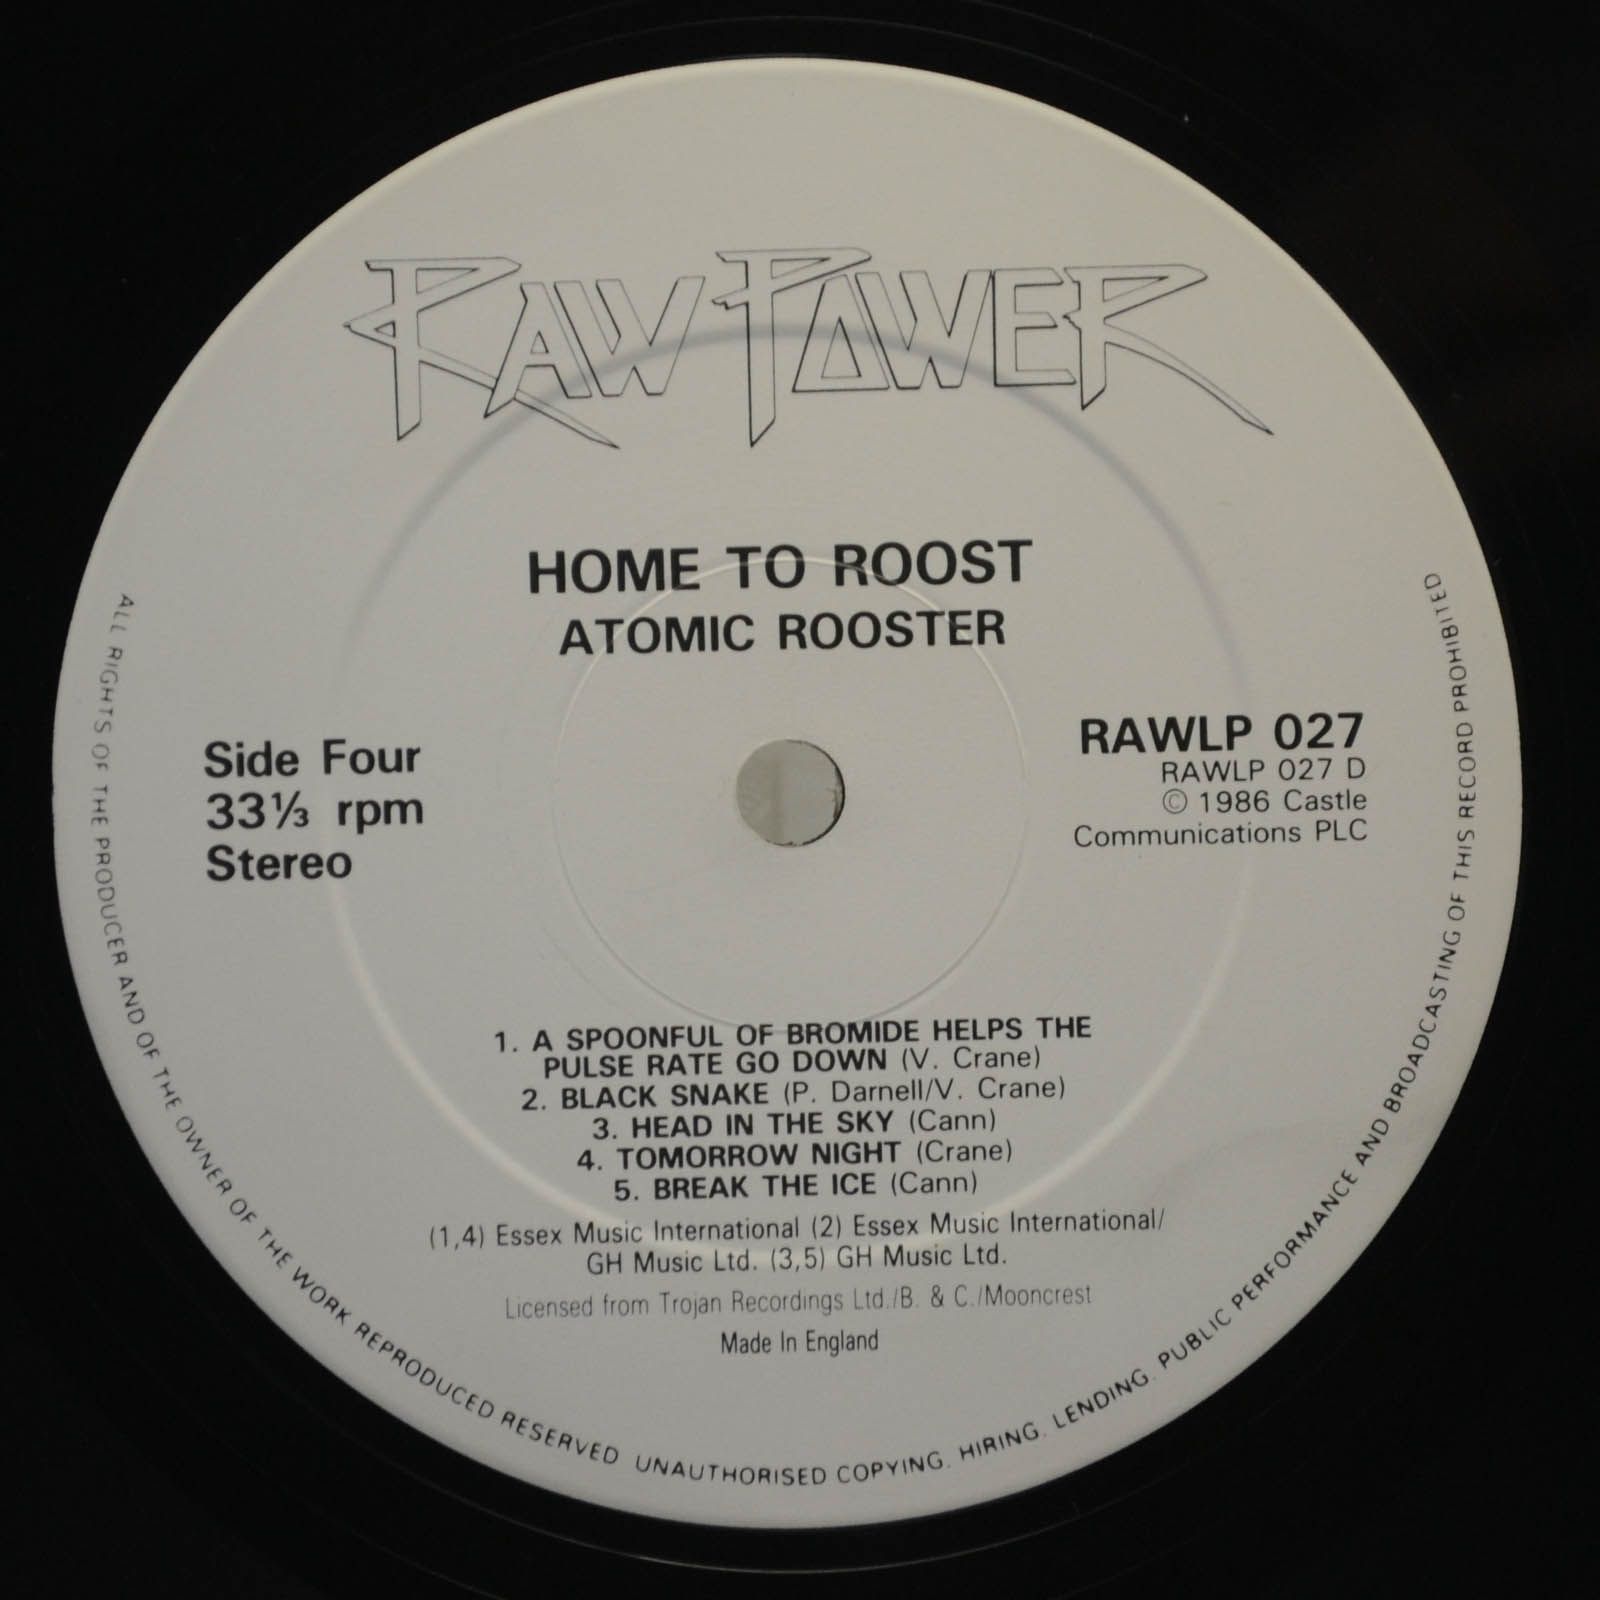 Atomic Rooster — Home To Roost (2LP, UK), 1977